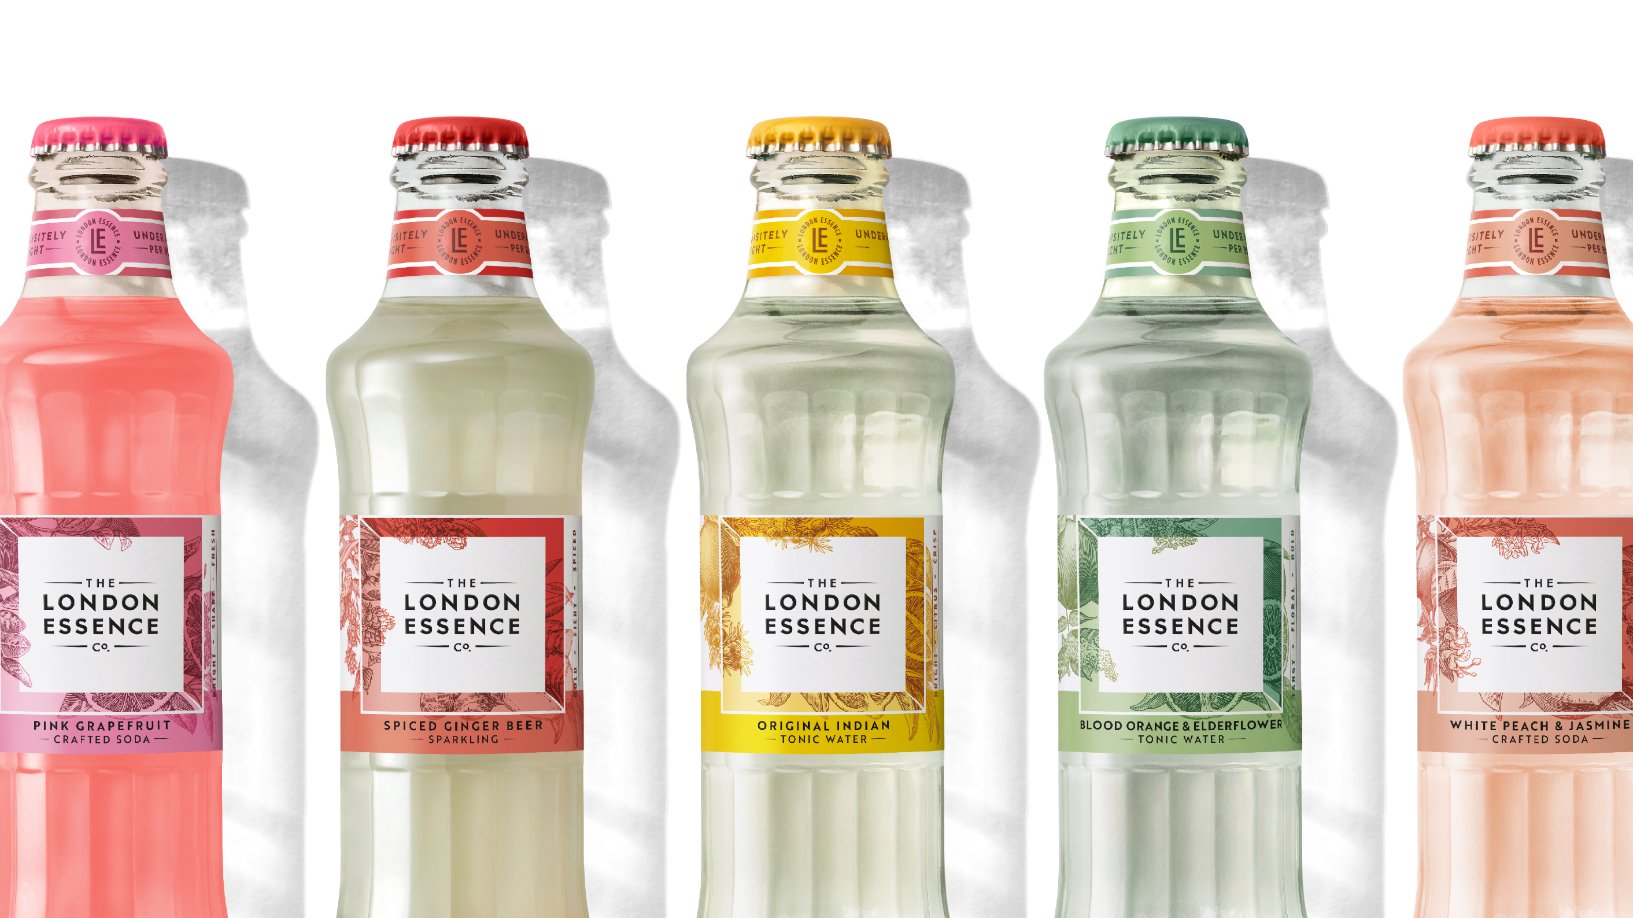 London Essence’s Mixed Drinks Look Fresher Than Ever with a New Look